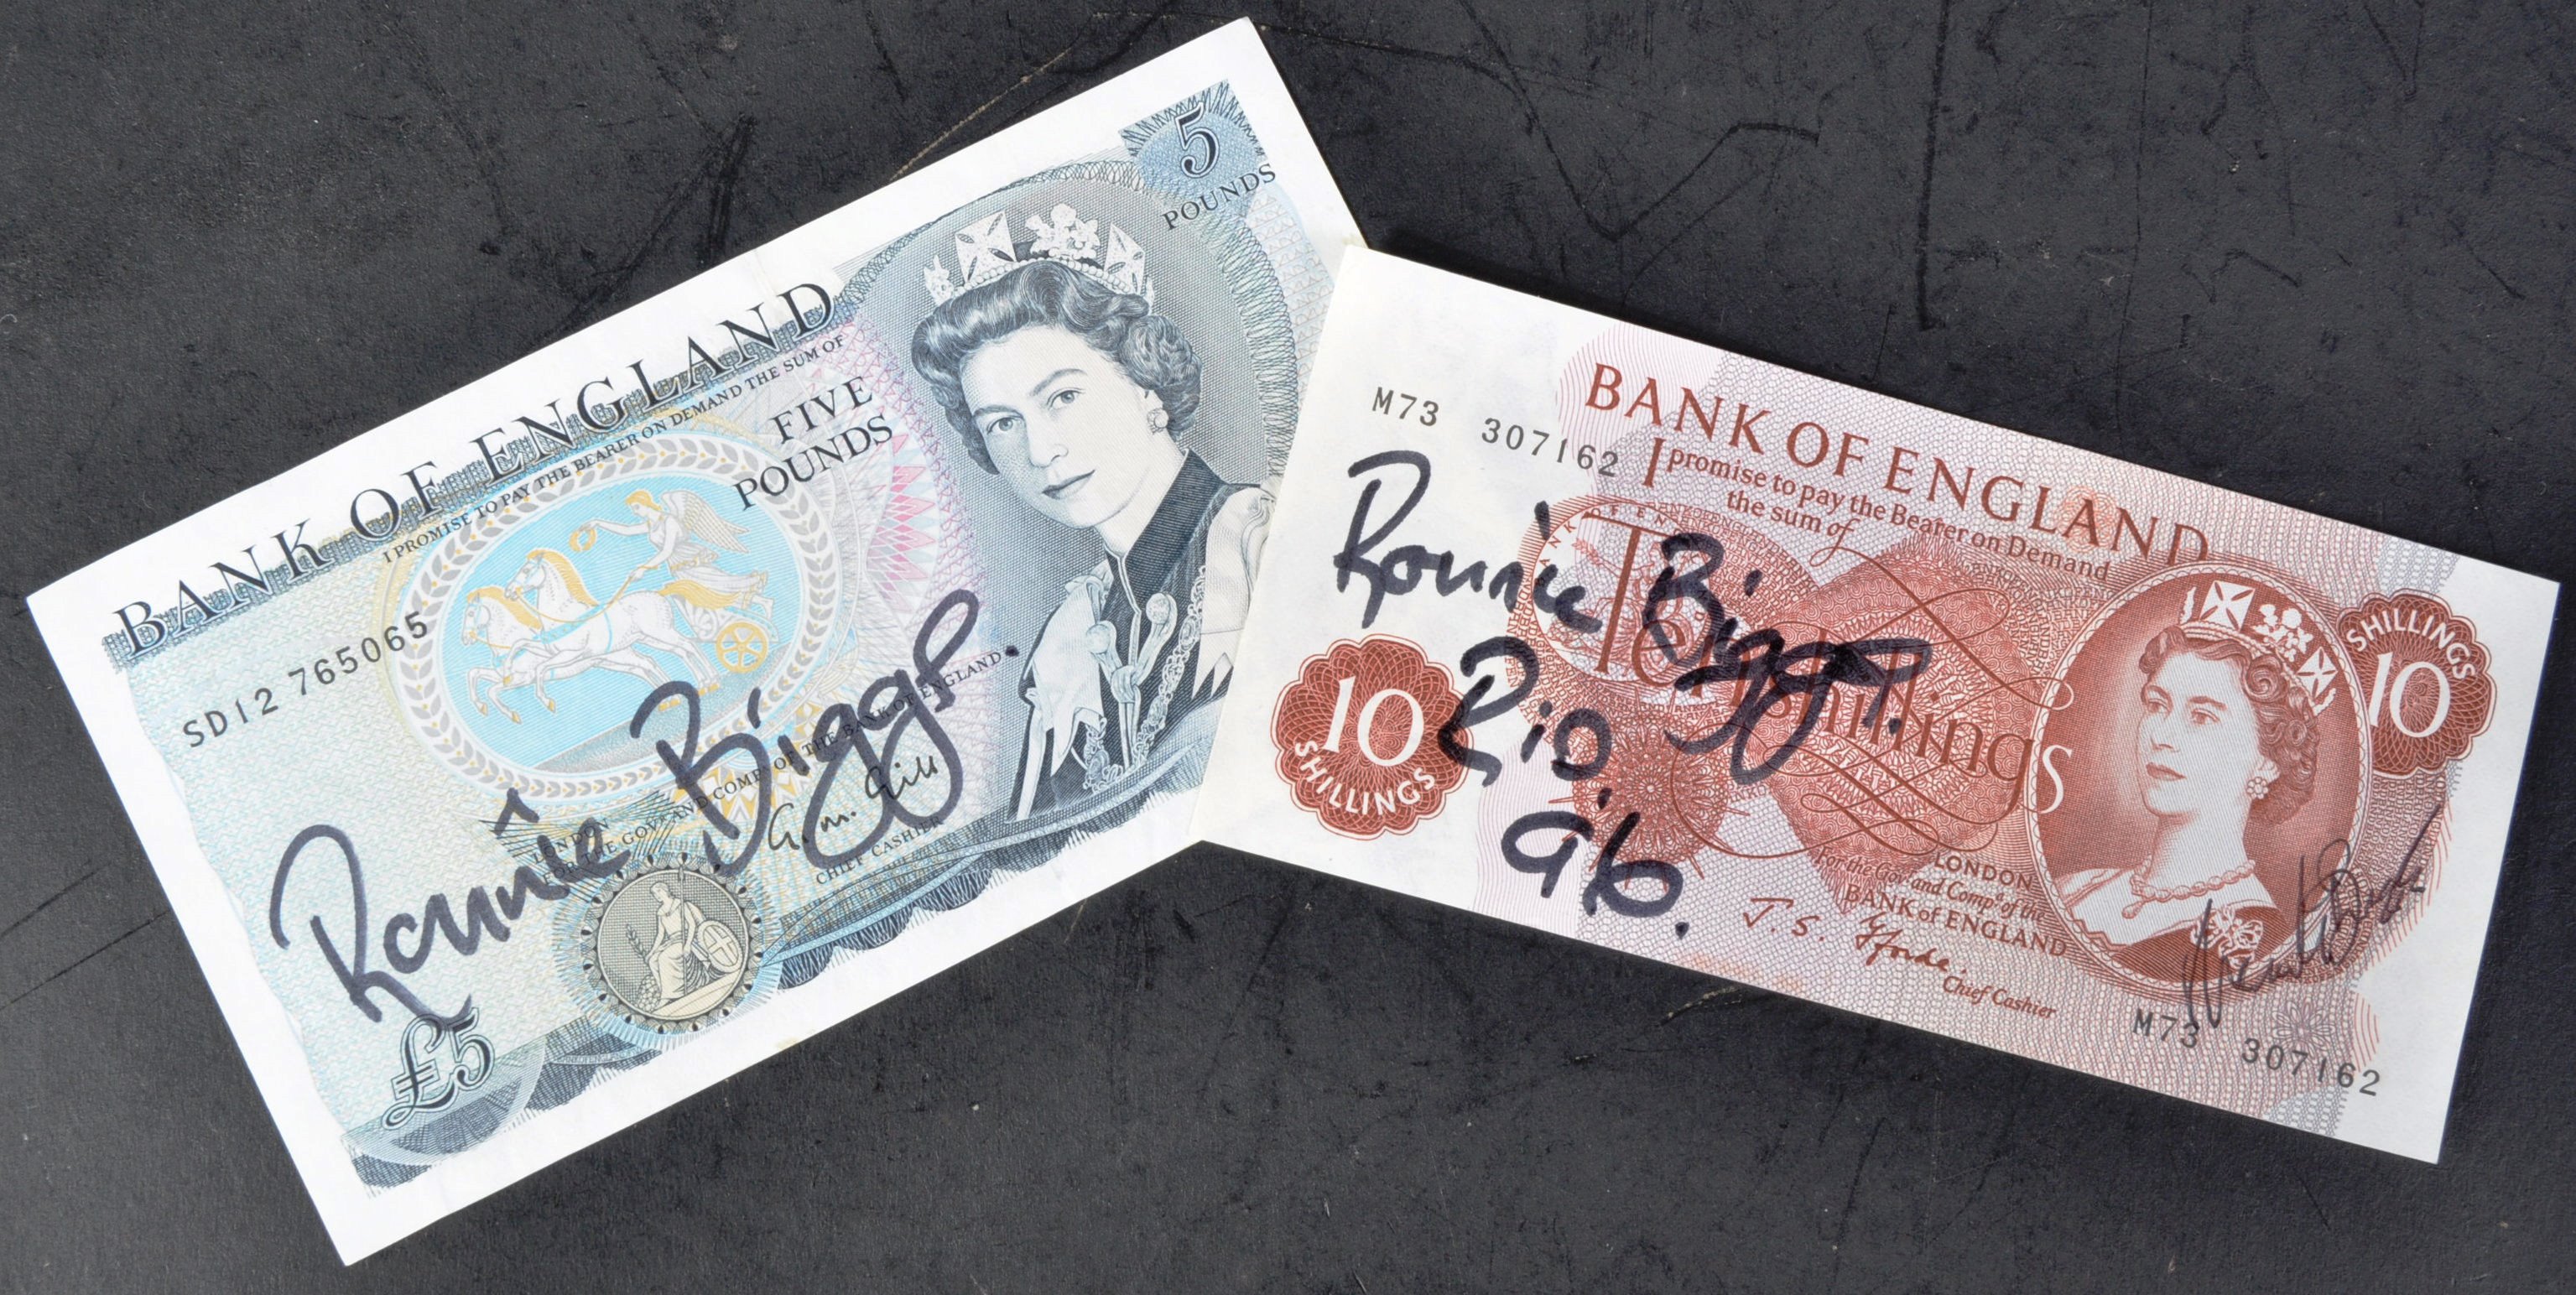 GREAT TRAIN ROBBERY - RONNIE BIGGS SIGNED BANK NOTES - Image 6 of 6